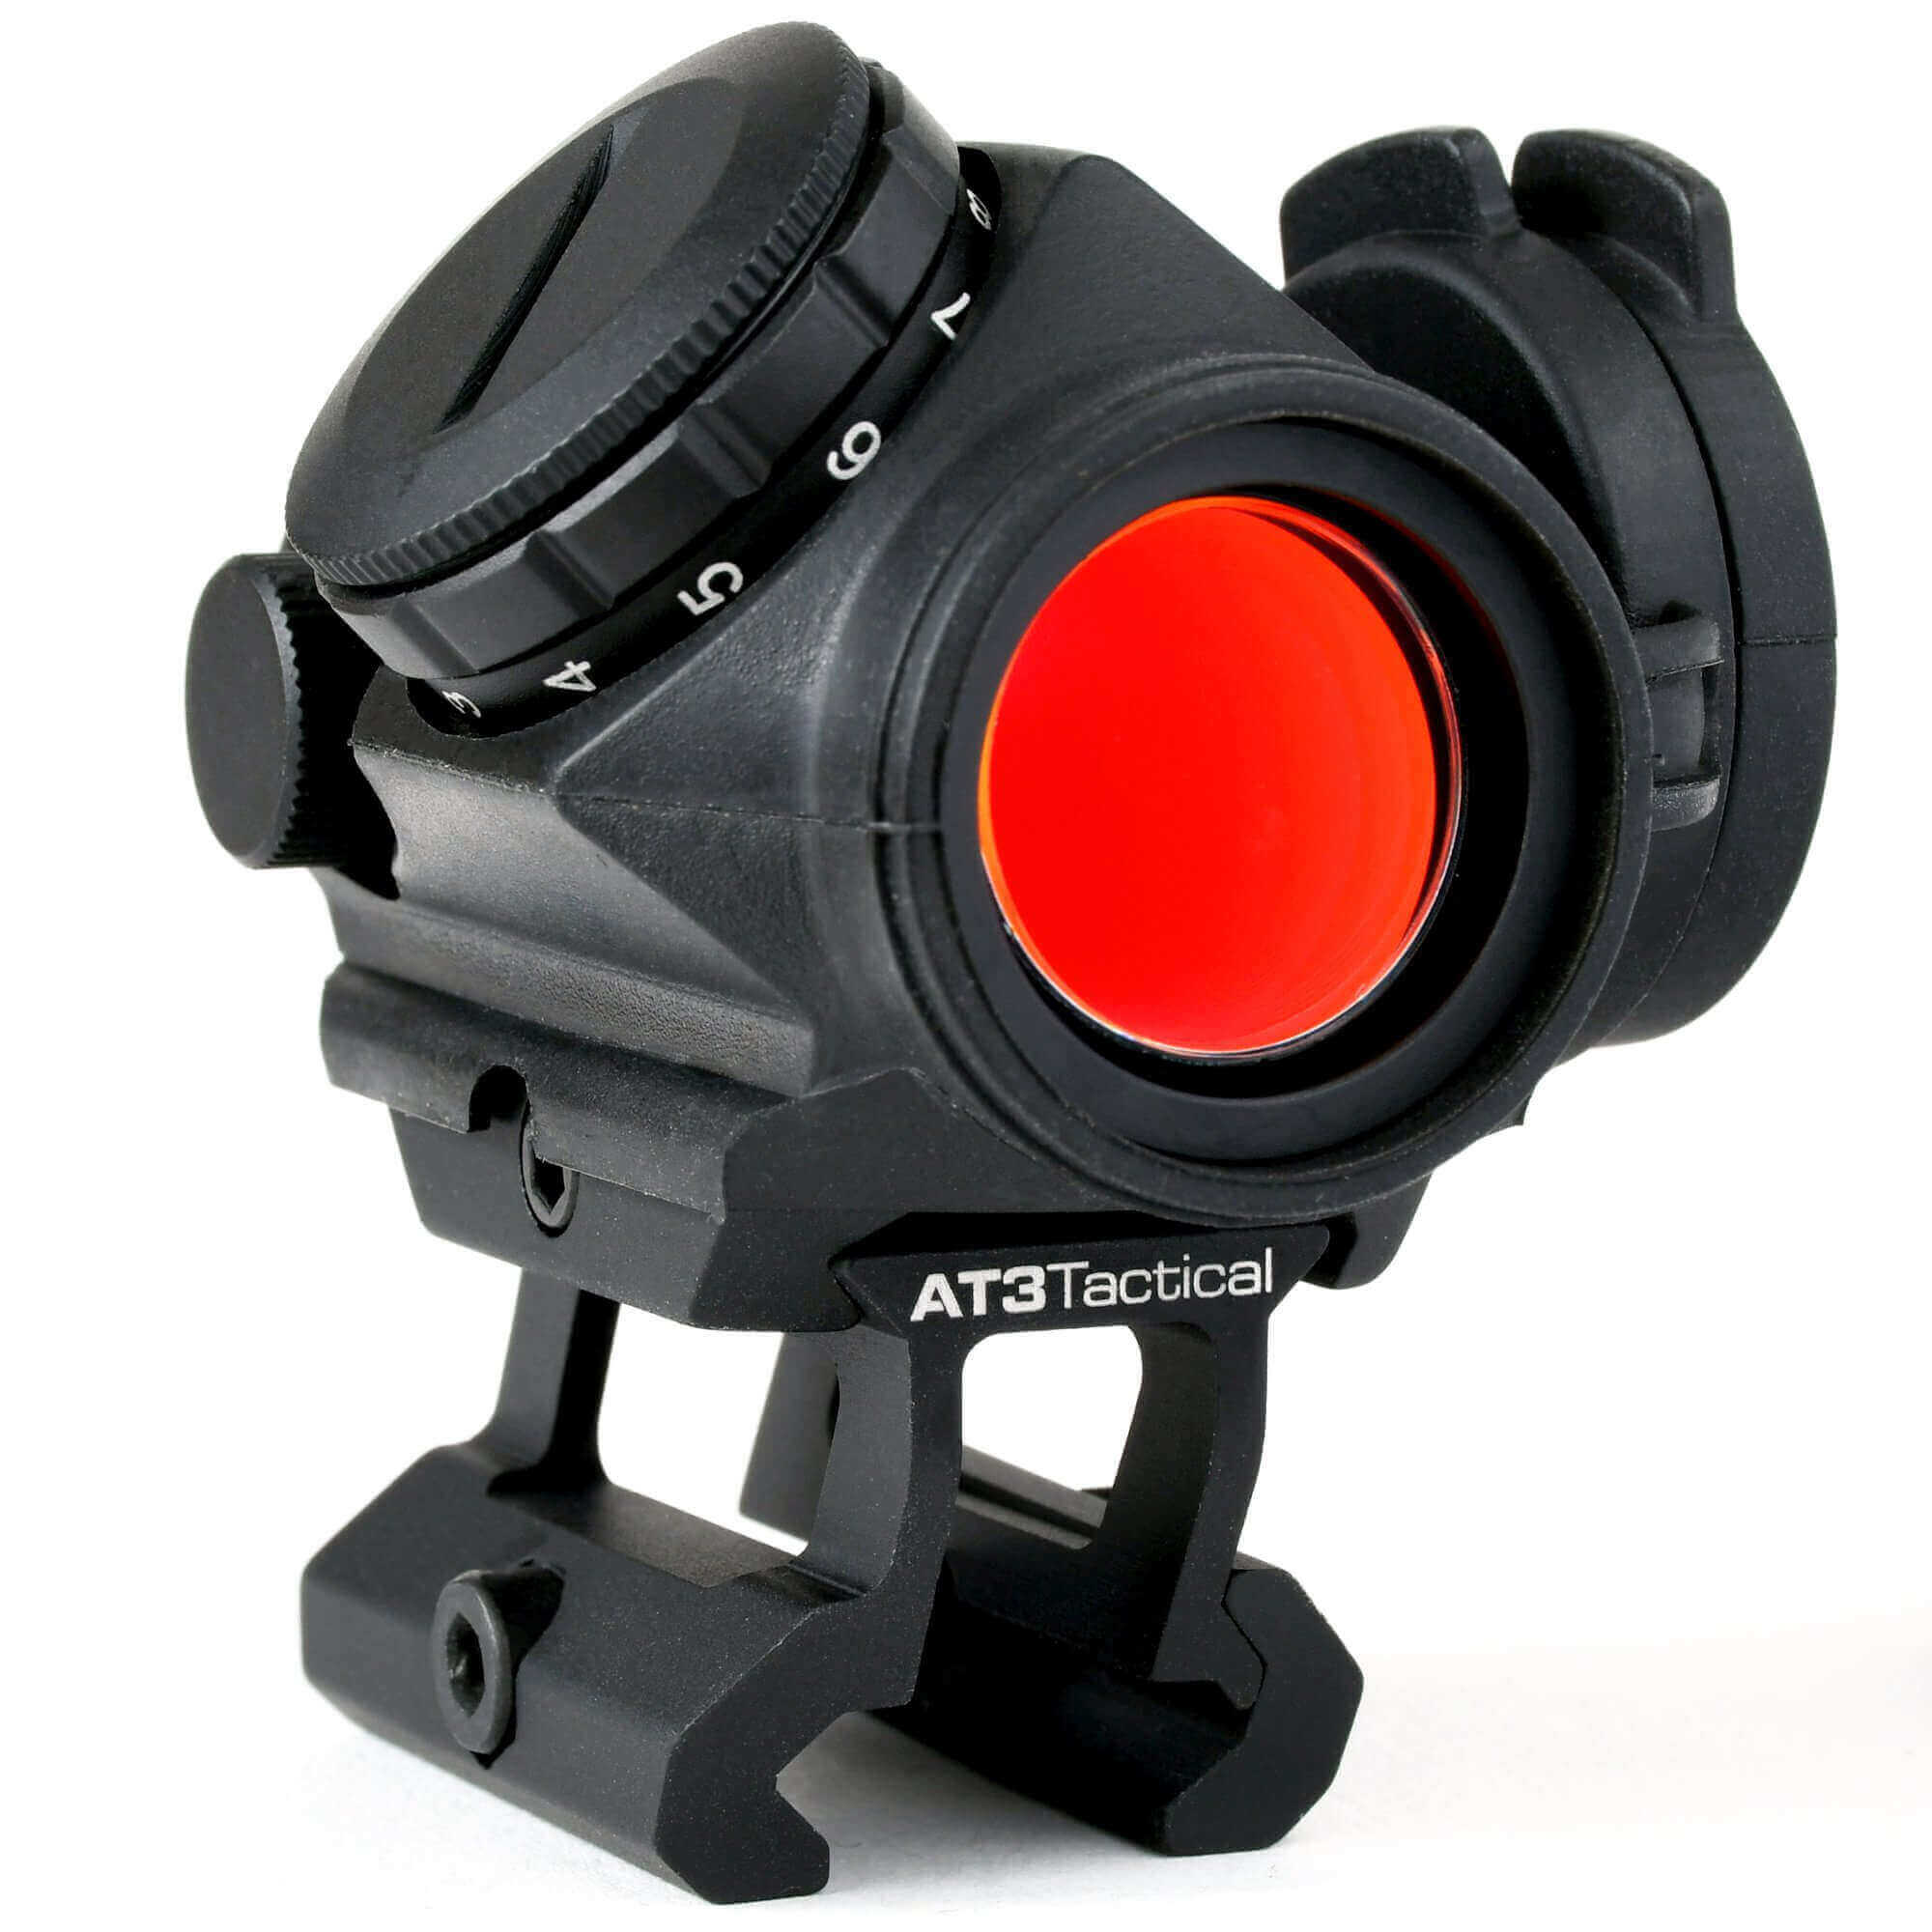 distress Kiwi Long Best Red Dot Sights on Amazon | LEOS | RD-50 PRO | AT3 Tactical